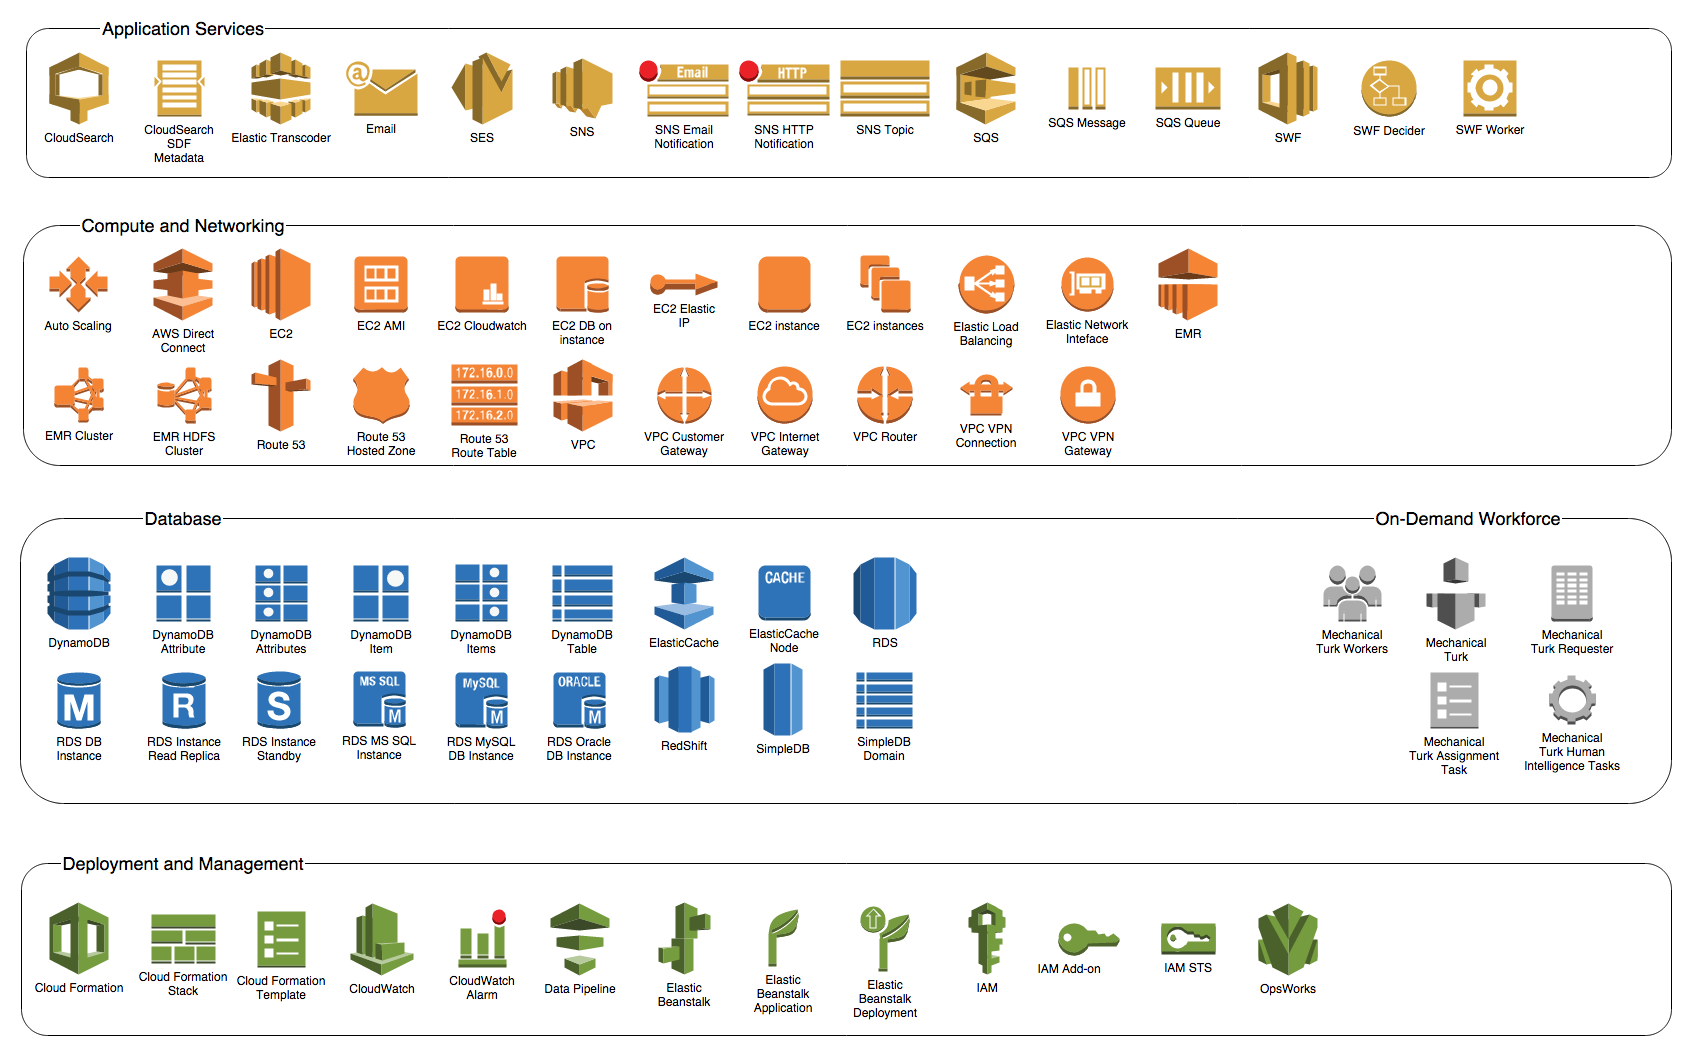 aws diagram and icon explained